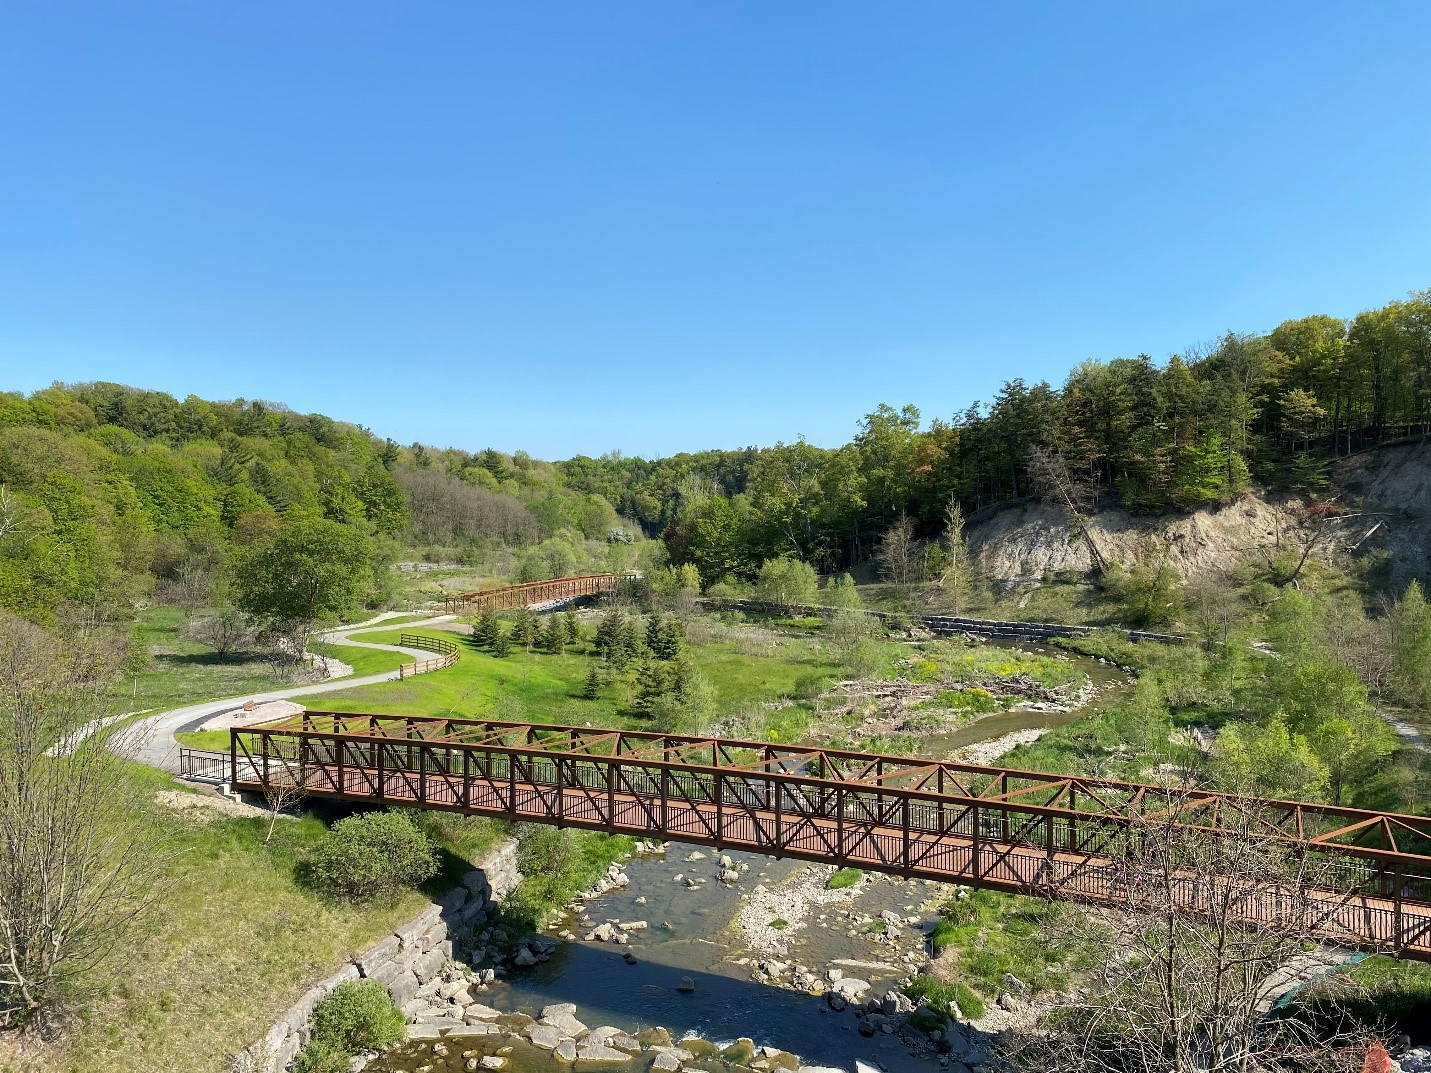 Newly installed pedestrian bridges, rest area and trail connection in Morningside Park south of Ellesmere Road.